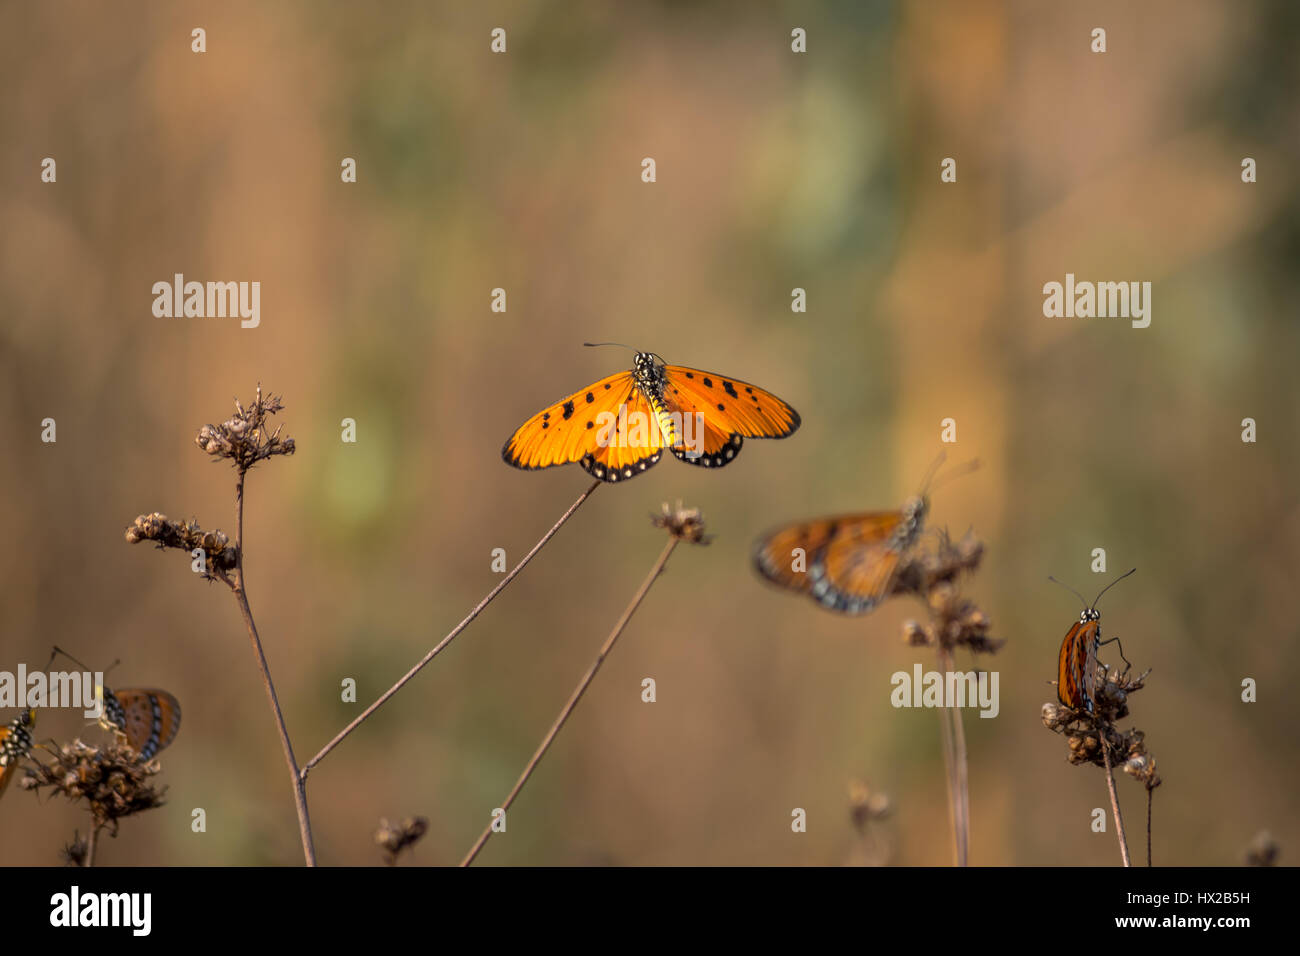 The tawny coster butterfly stretching her wings, India Stock Photo